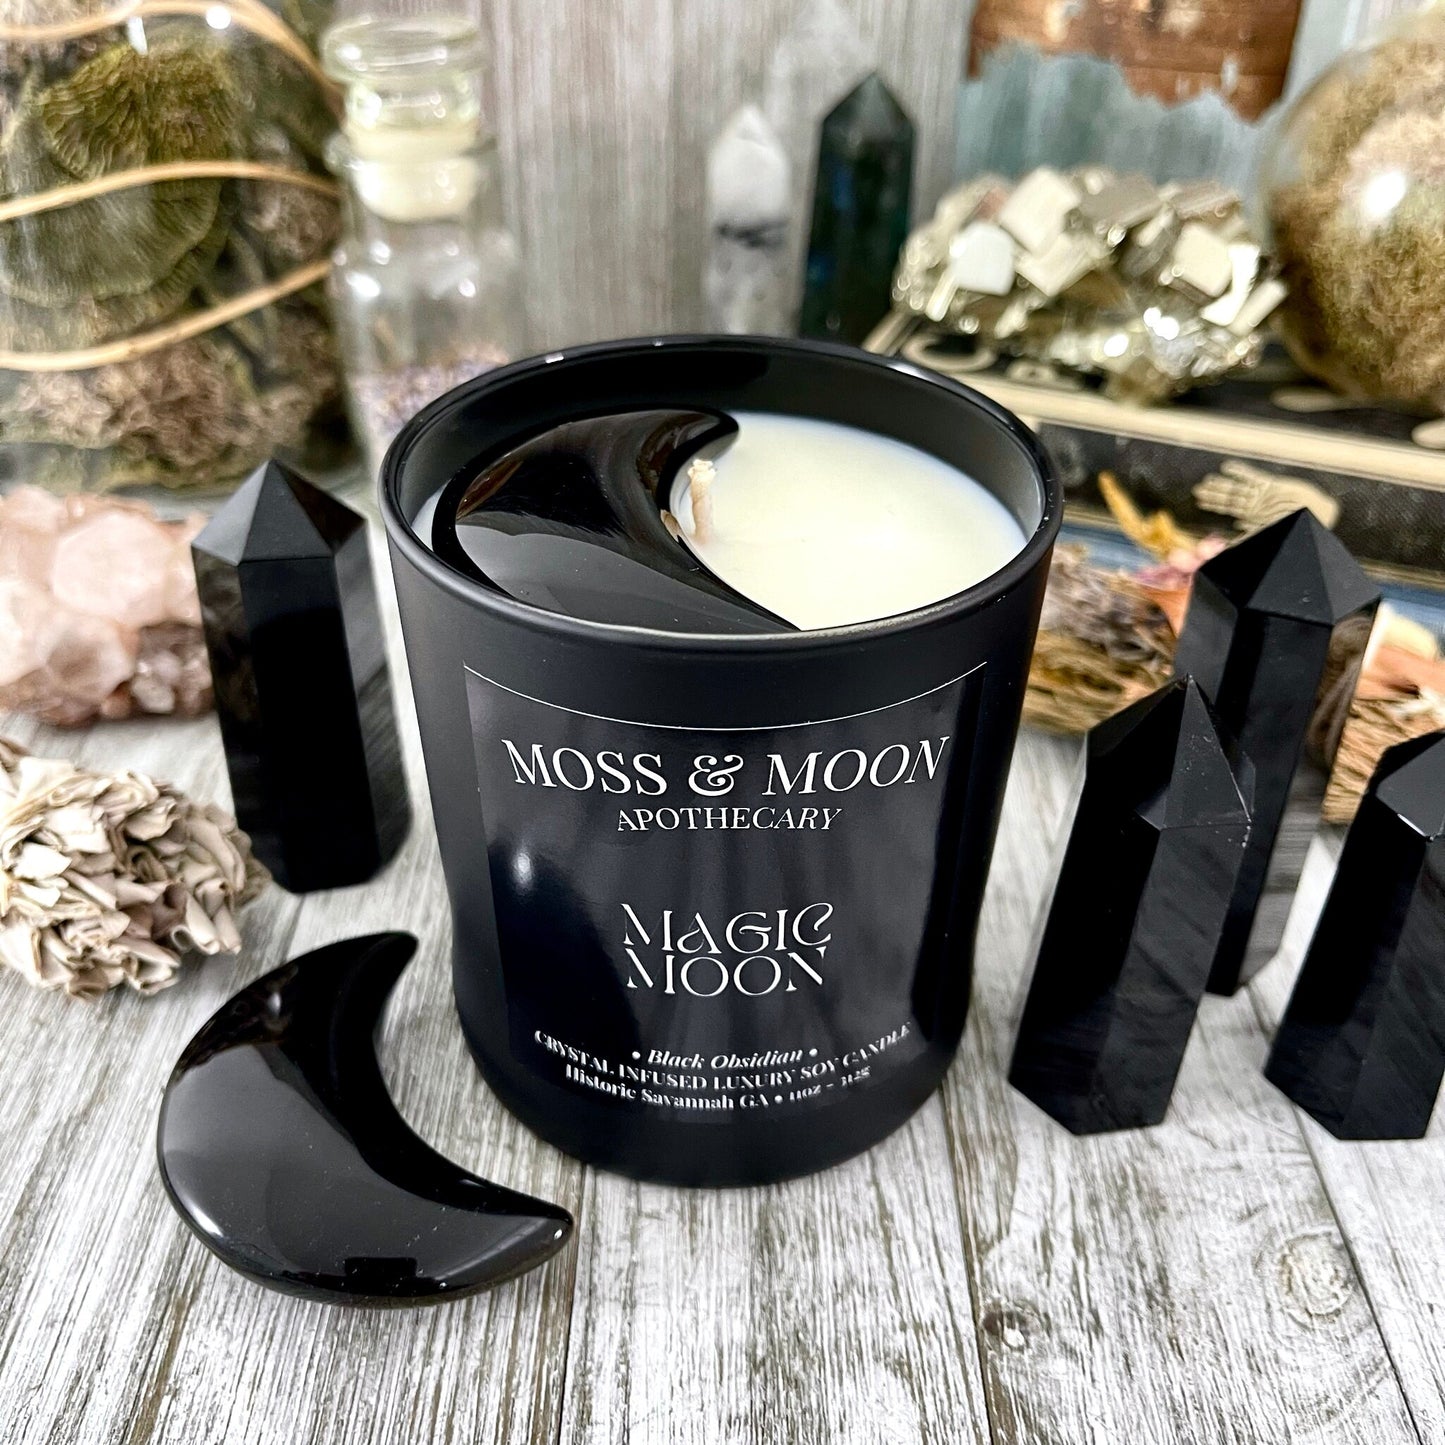 Magic Moon Candle with Black Obsidian - Moss & Moon Apothecary Crystal Infused Luxury Soy Candle